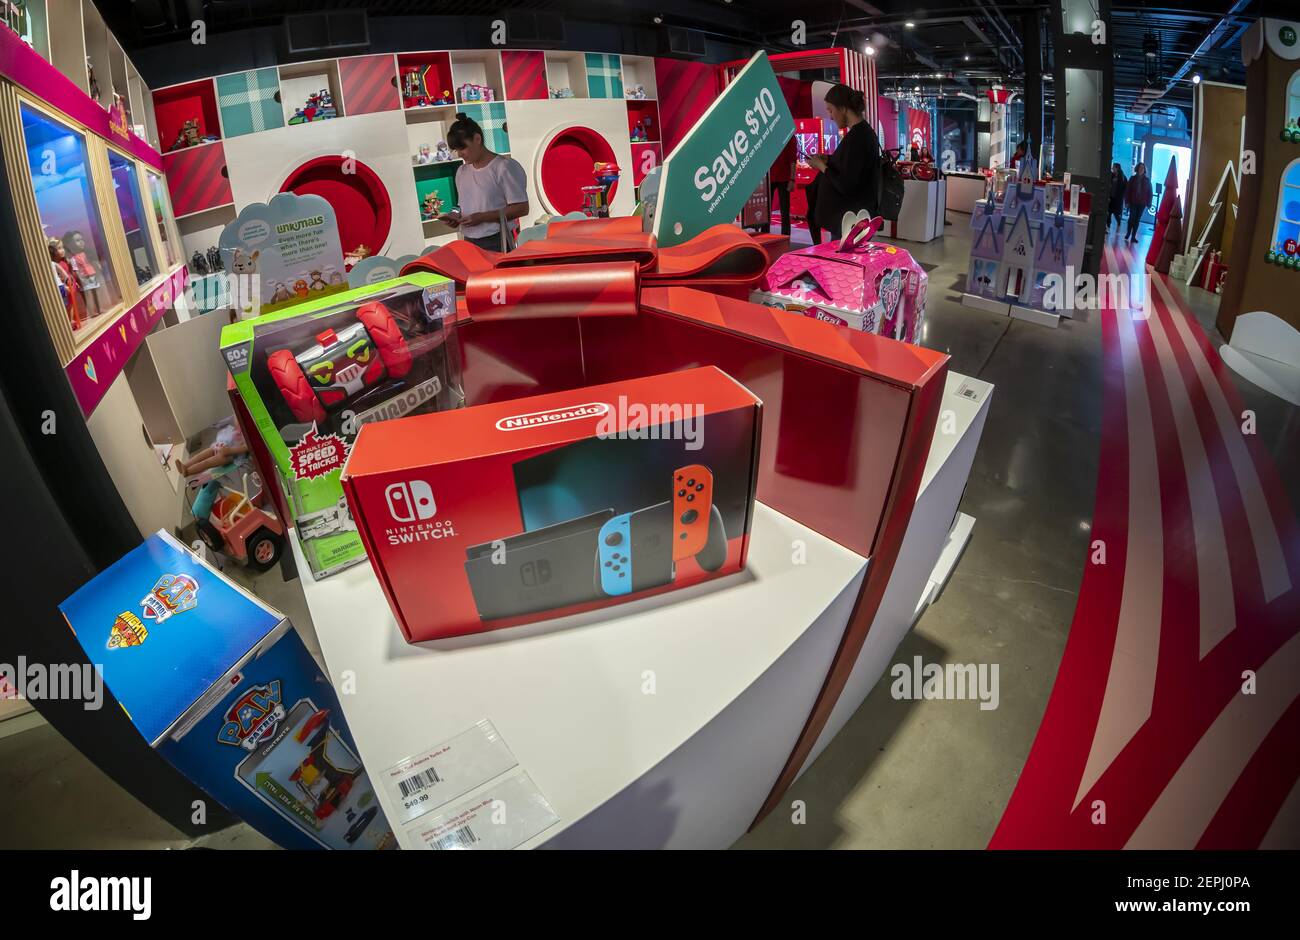 Nintendo Switch and other products on display at the Target "Wonderland!"  pop-up store in the Meatpacking District in New York on its grand opening  day, Friday, December 13, 2019. The pop-up, featuring